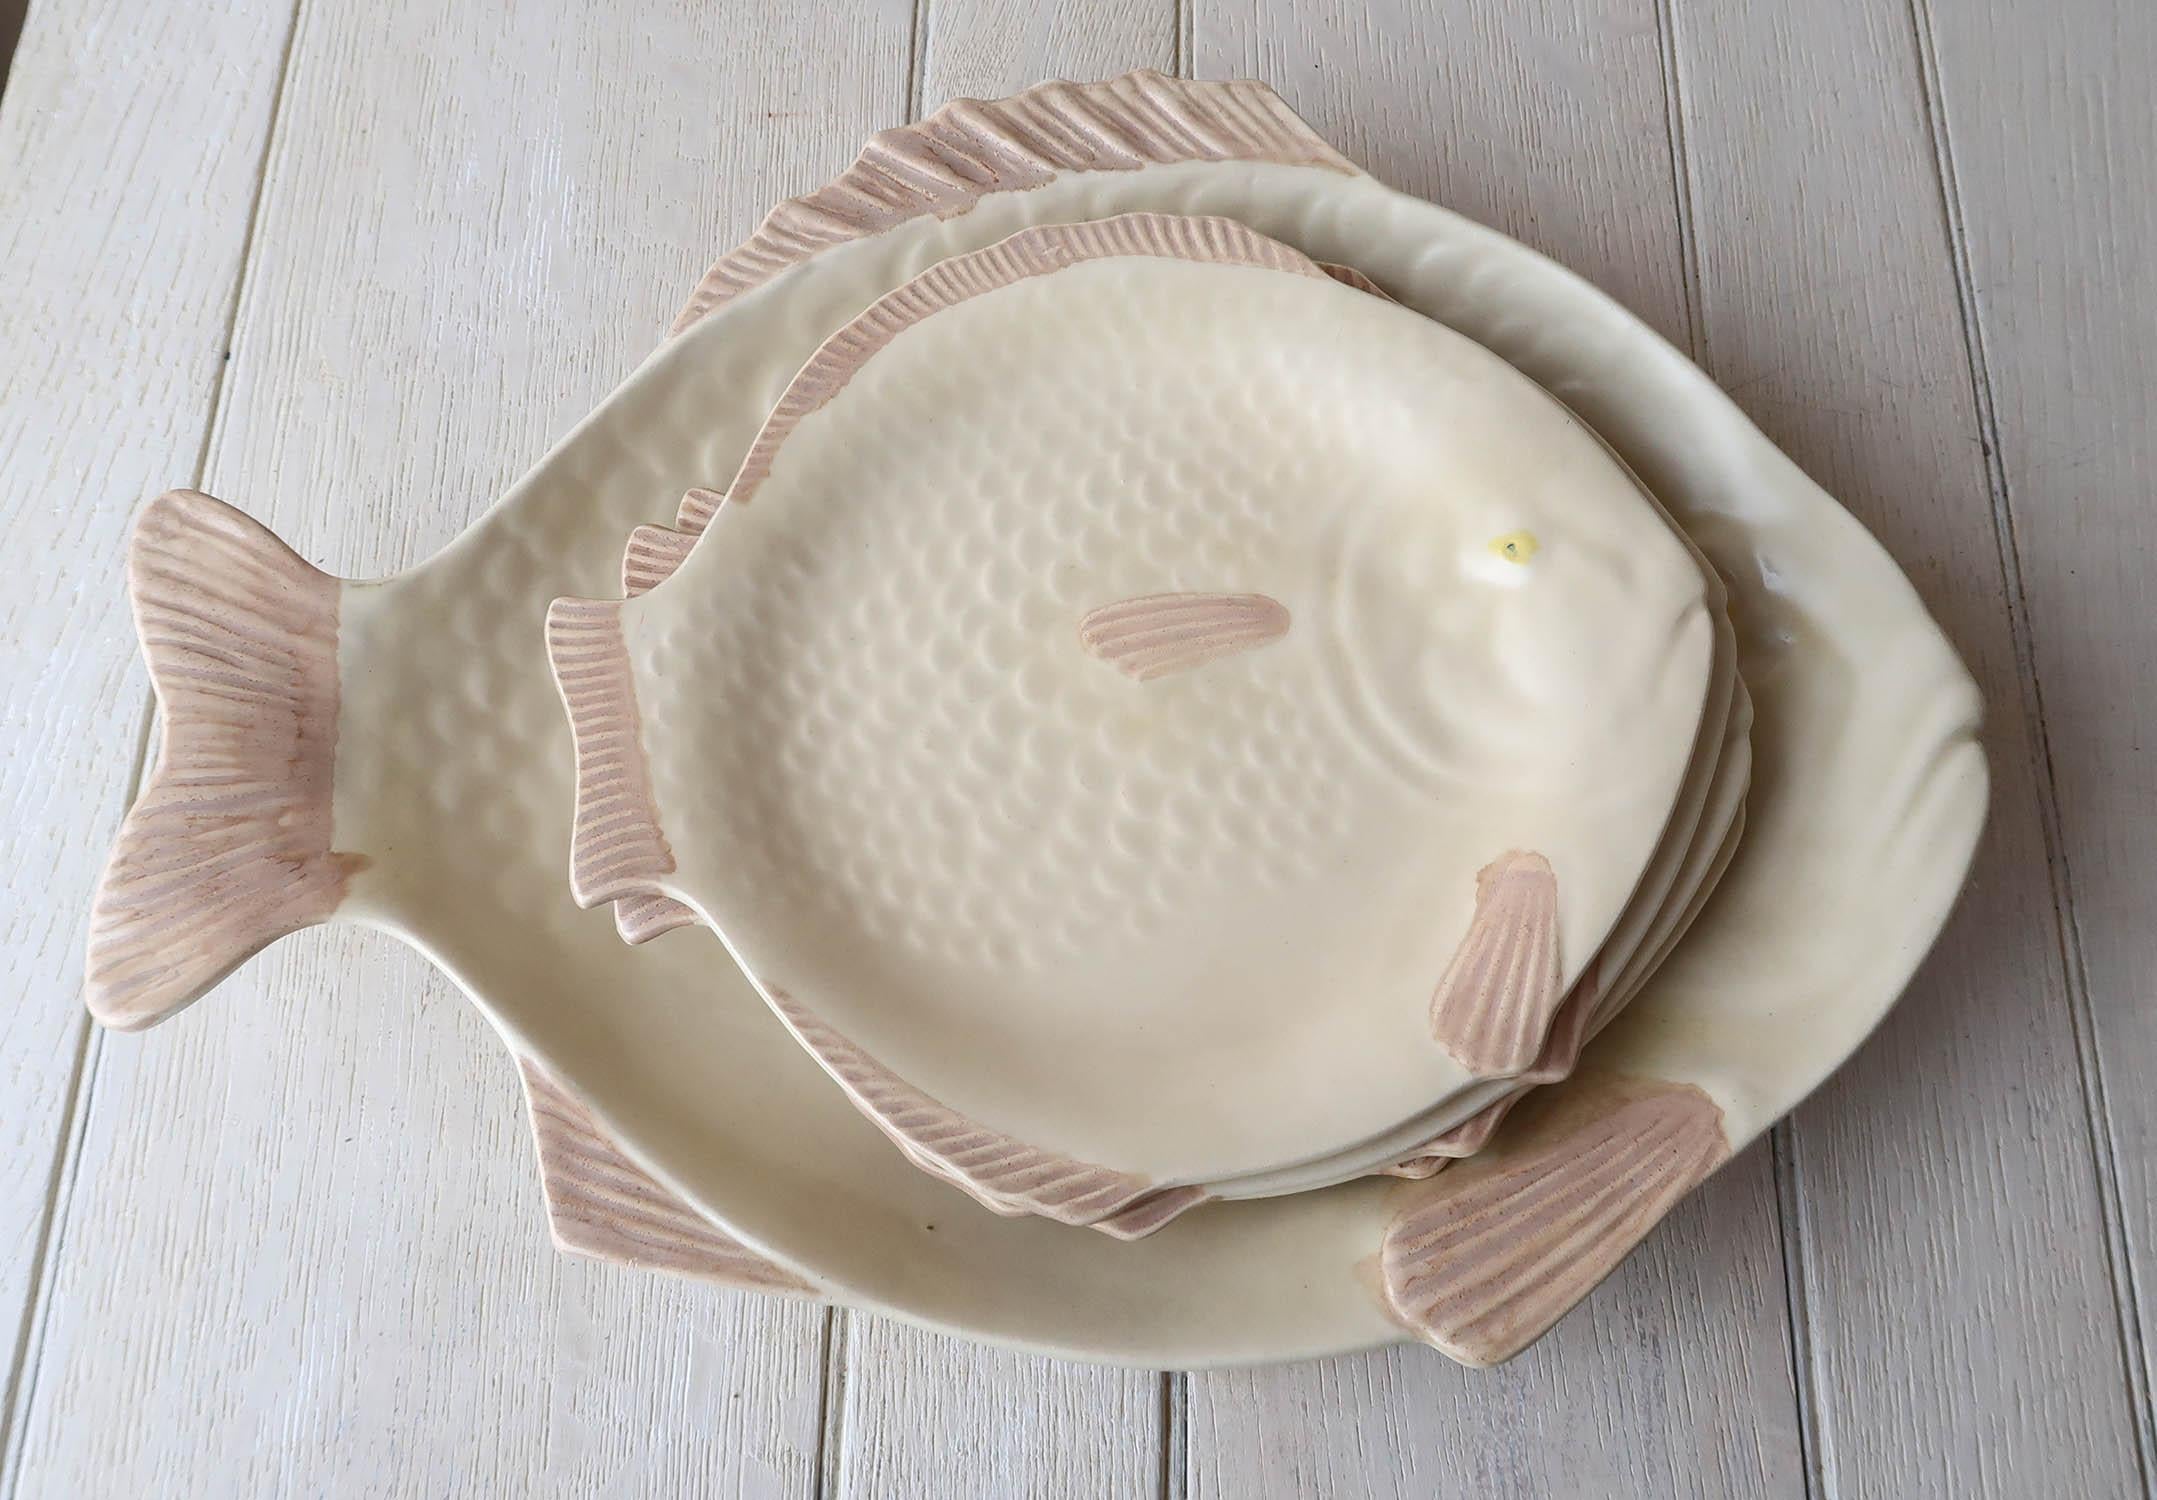 Super art deco pottery fish set

Comprising 4 plates and a serving dish

By Shorter & Sons, Stoke On Trent.

All in good condition

The measurement relates to the serving dish.


